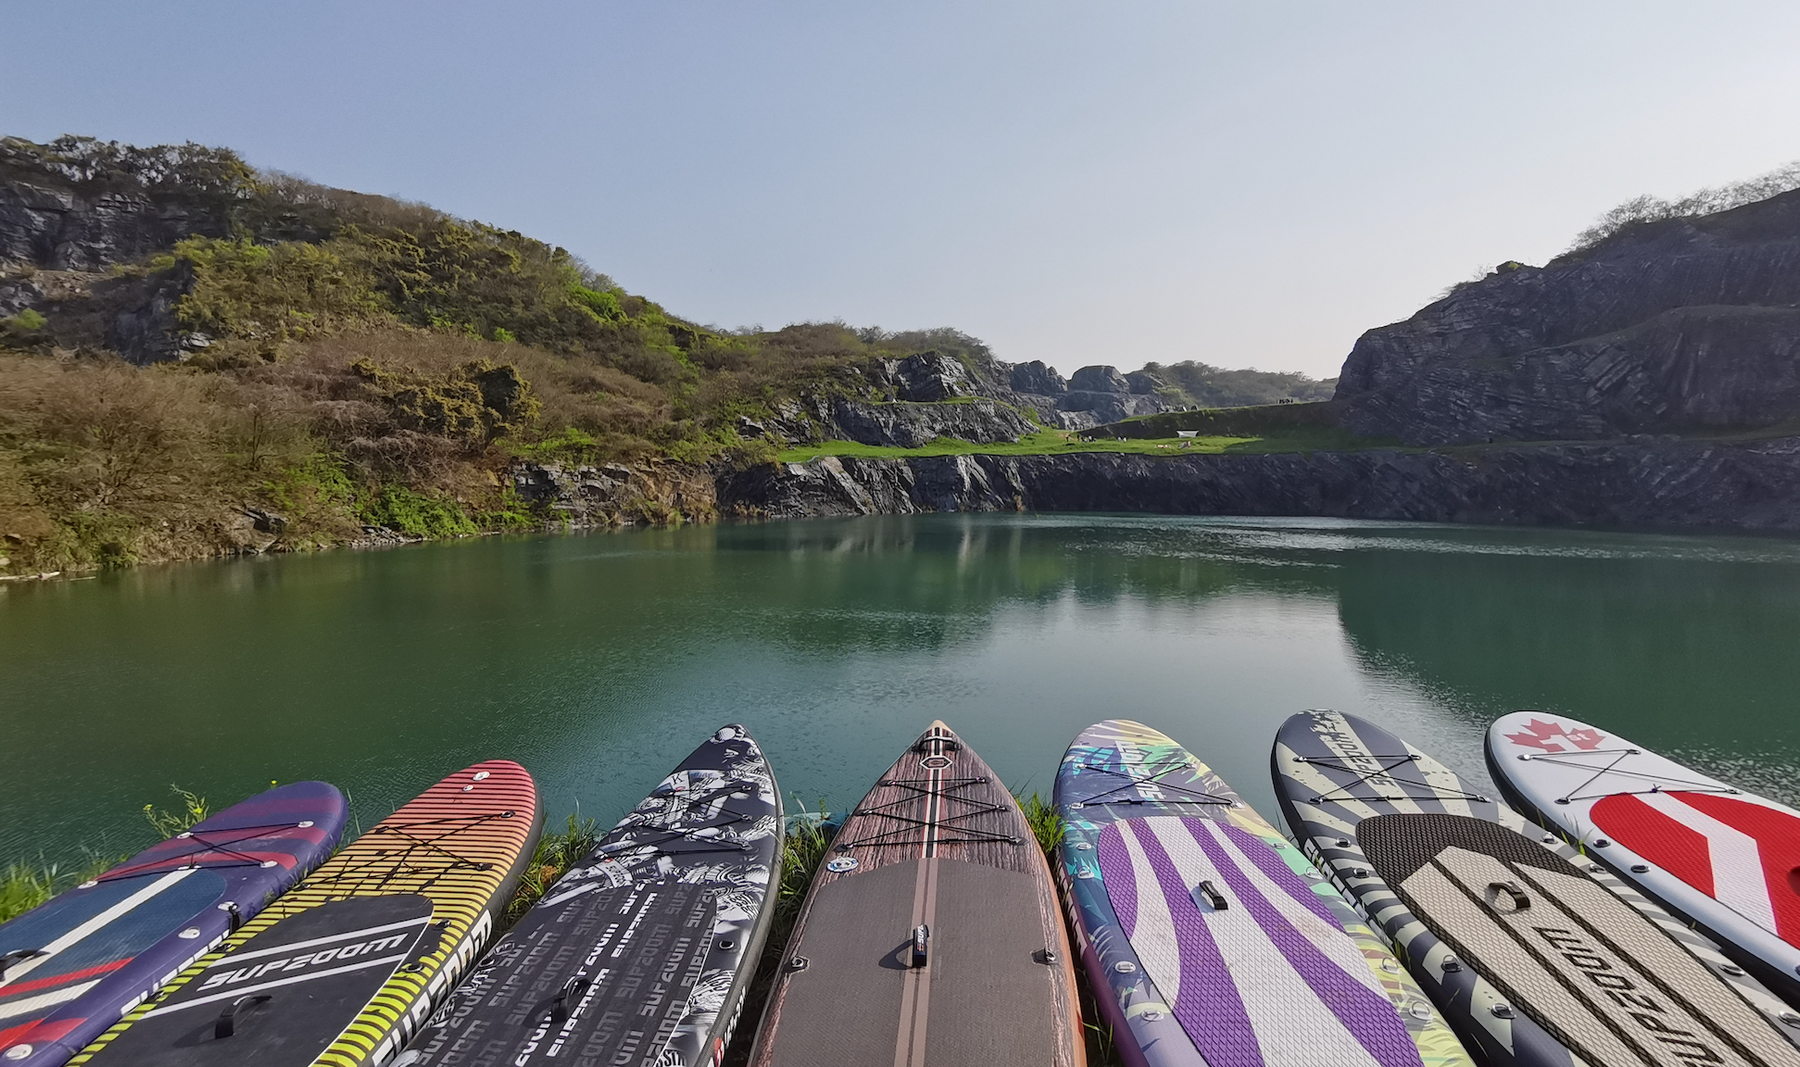 The most practical tips for inflating & deflating inflatable paddleboards